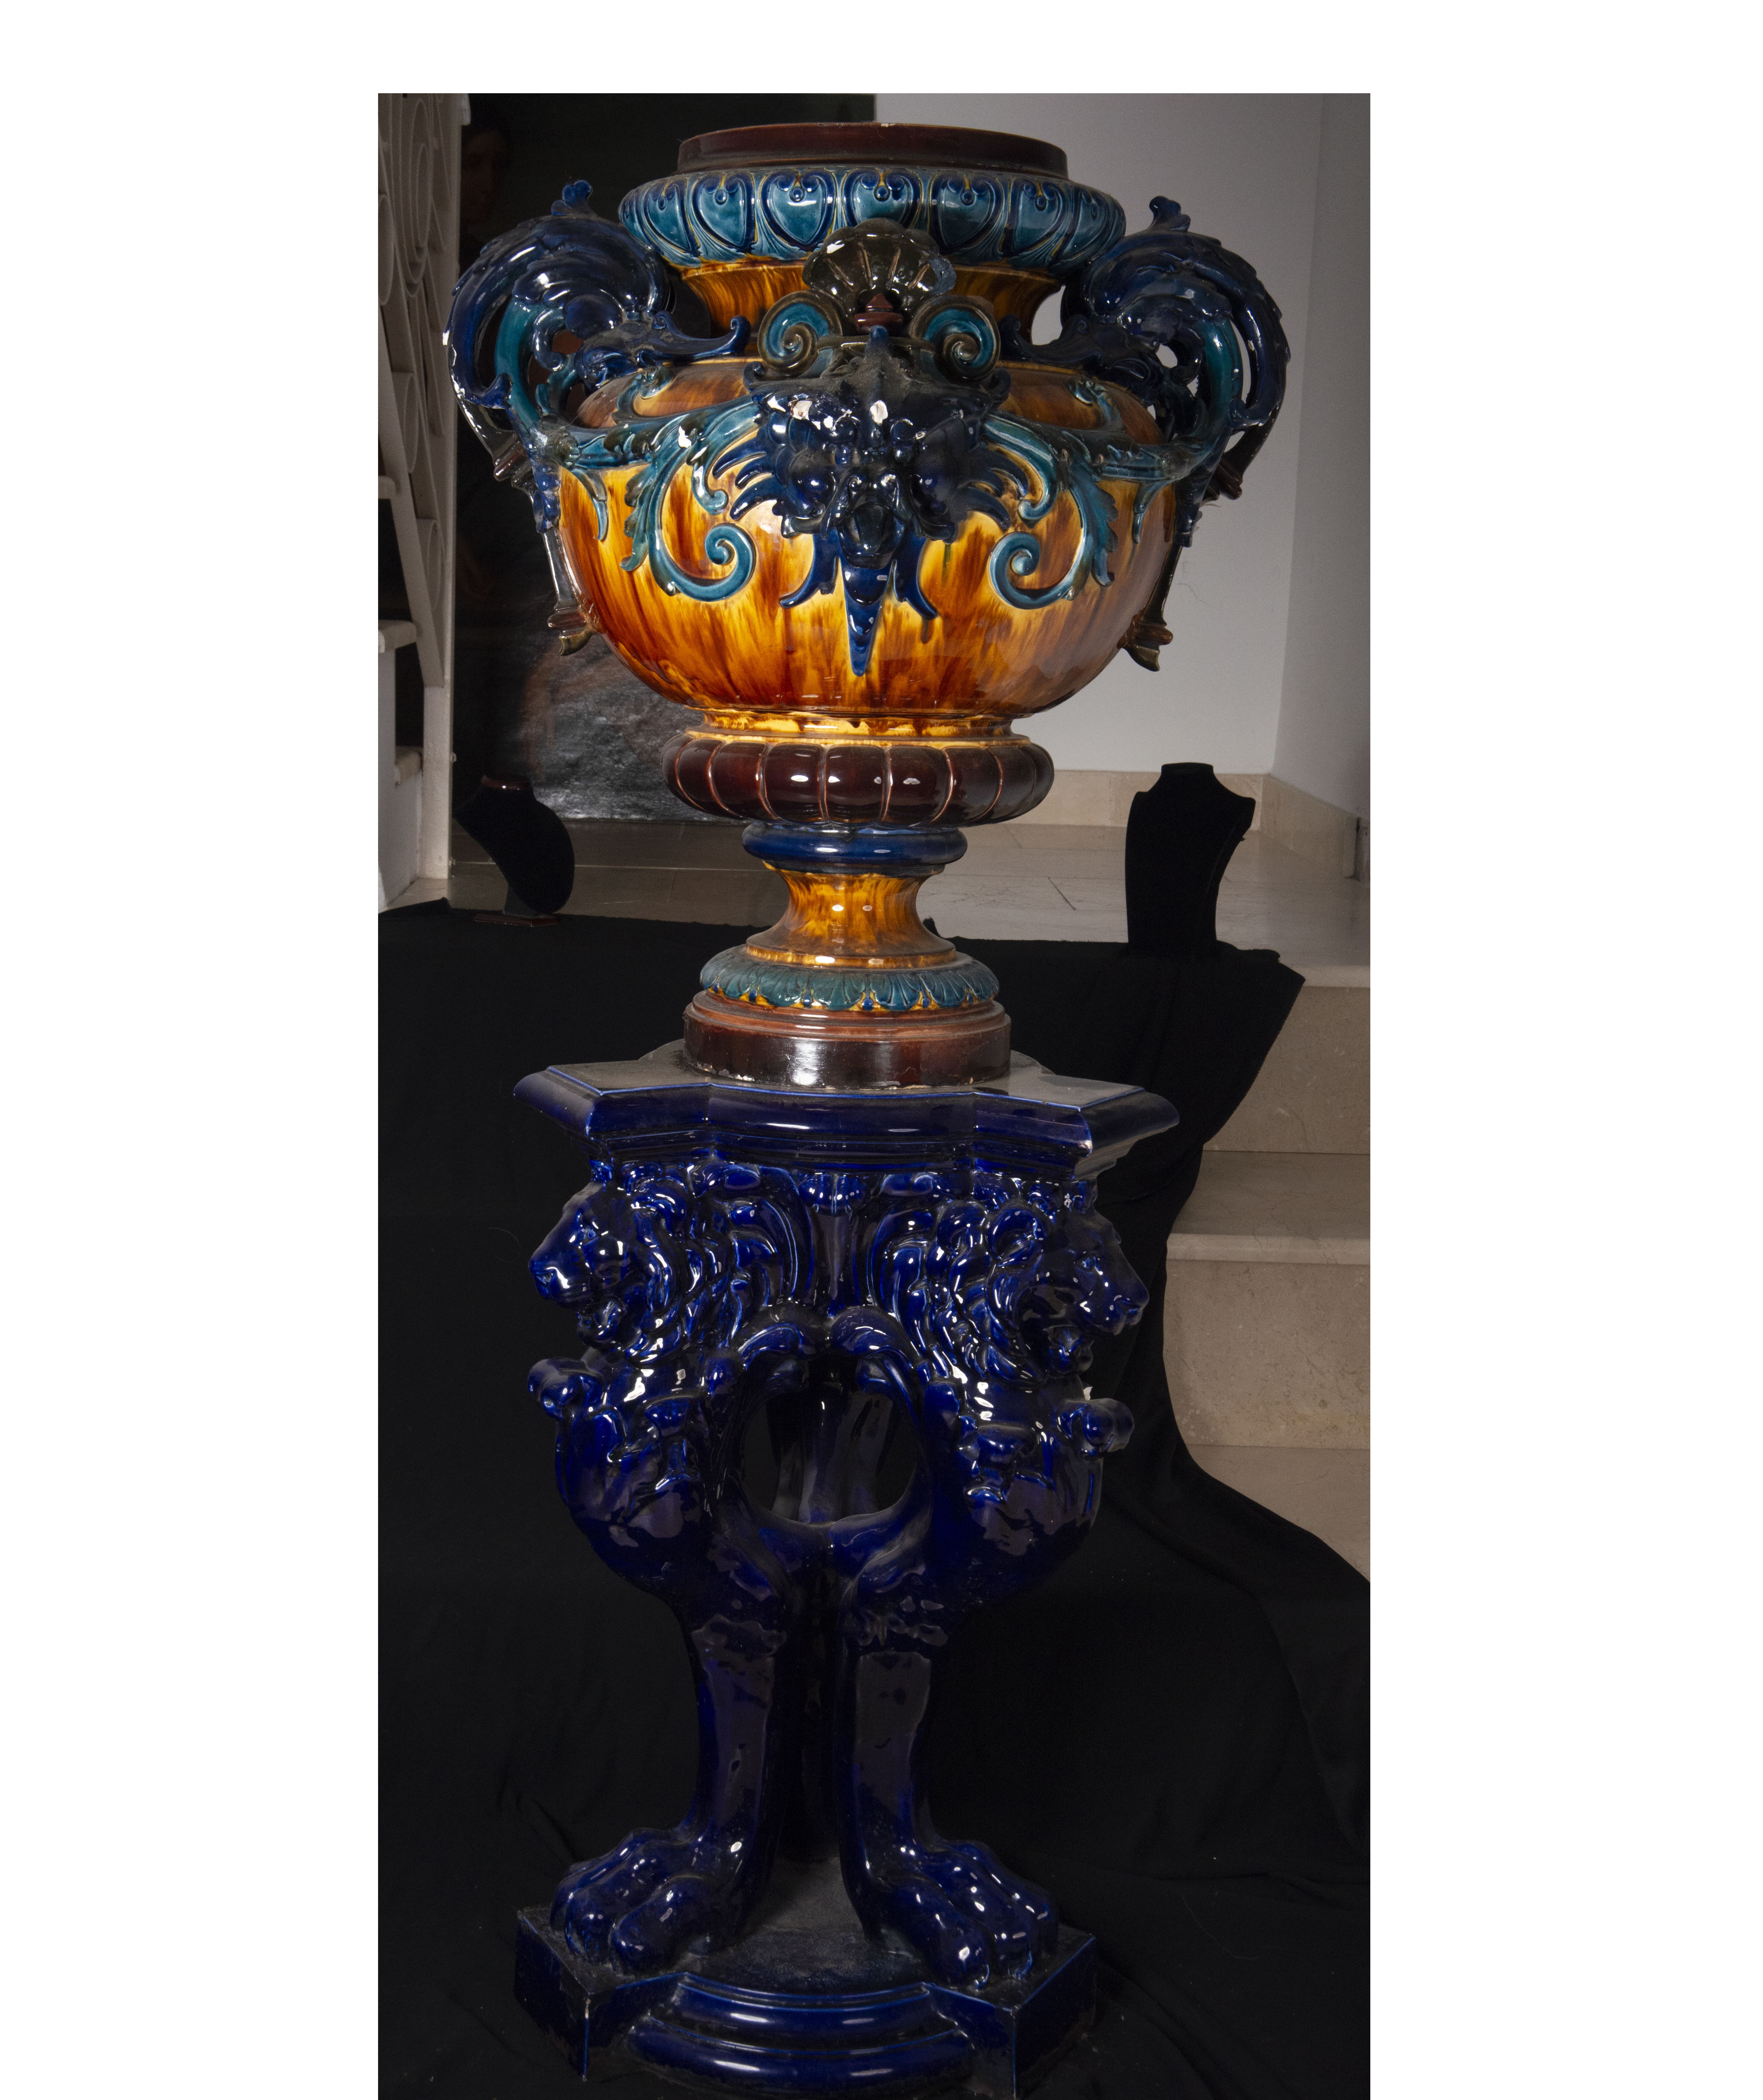 Large French Planter in cobalt blue glazed and polychrome stoneware in the Art Nouveau style, around - Image 4 of 6